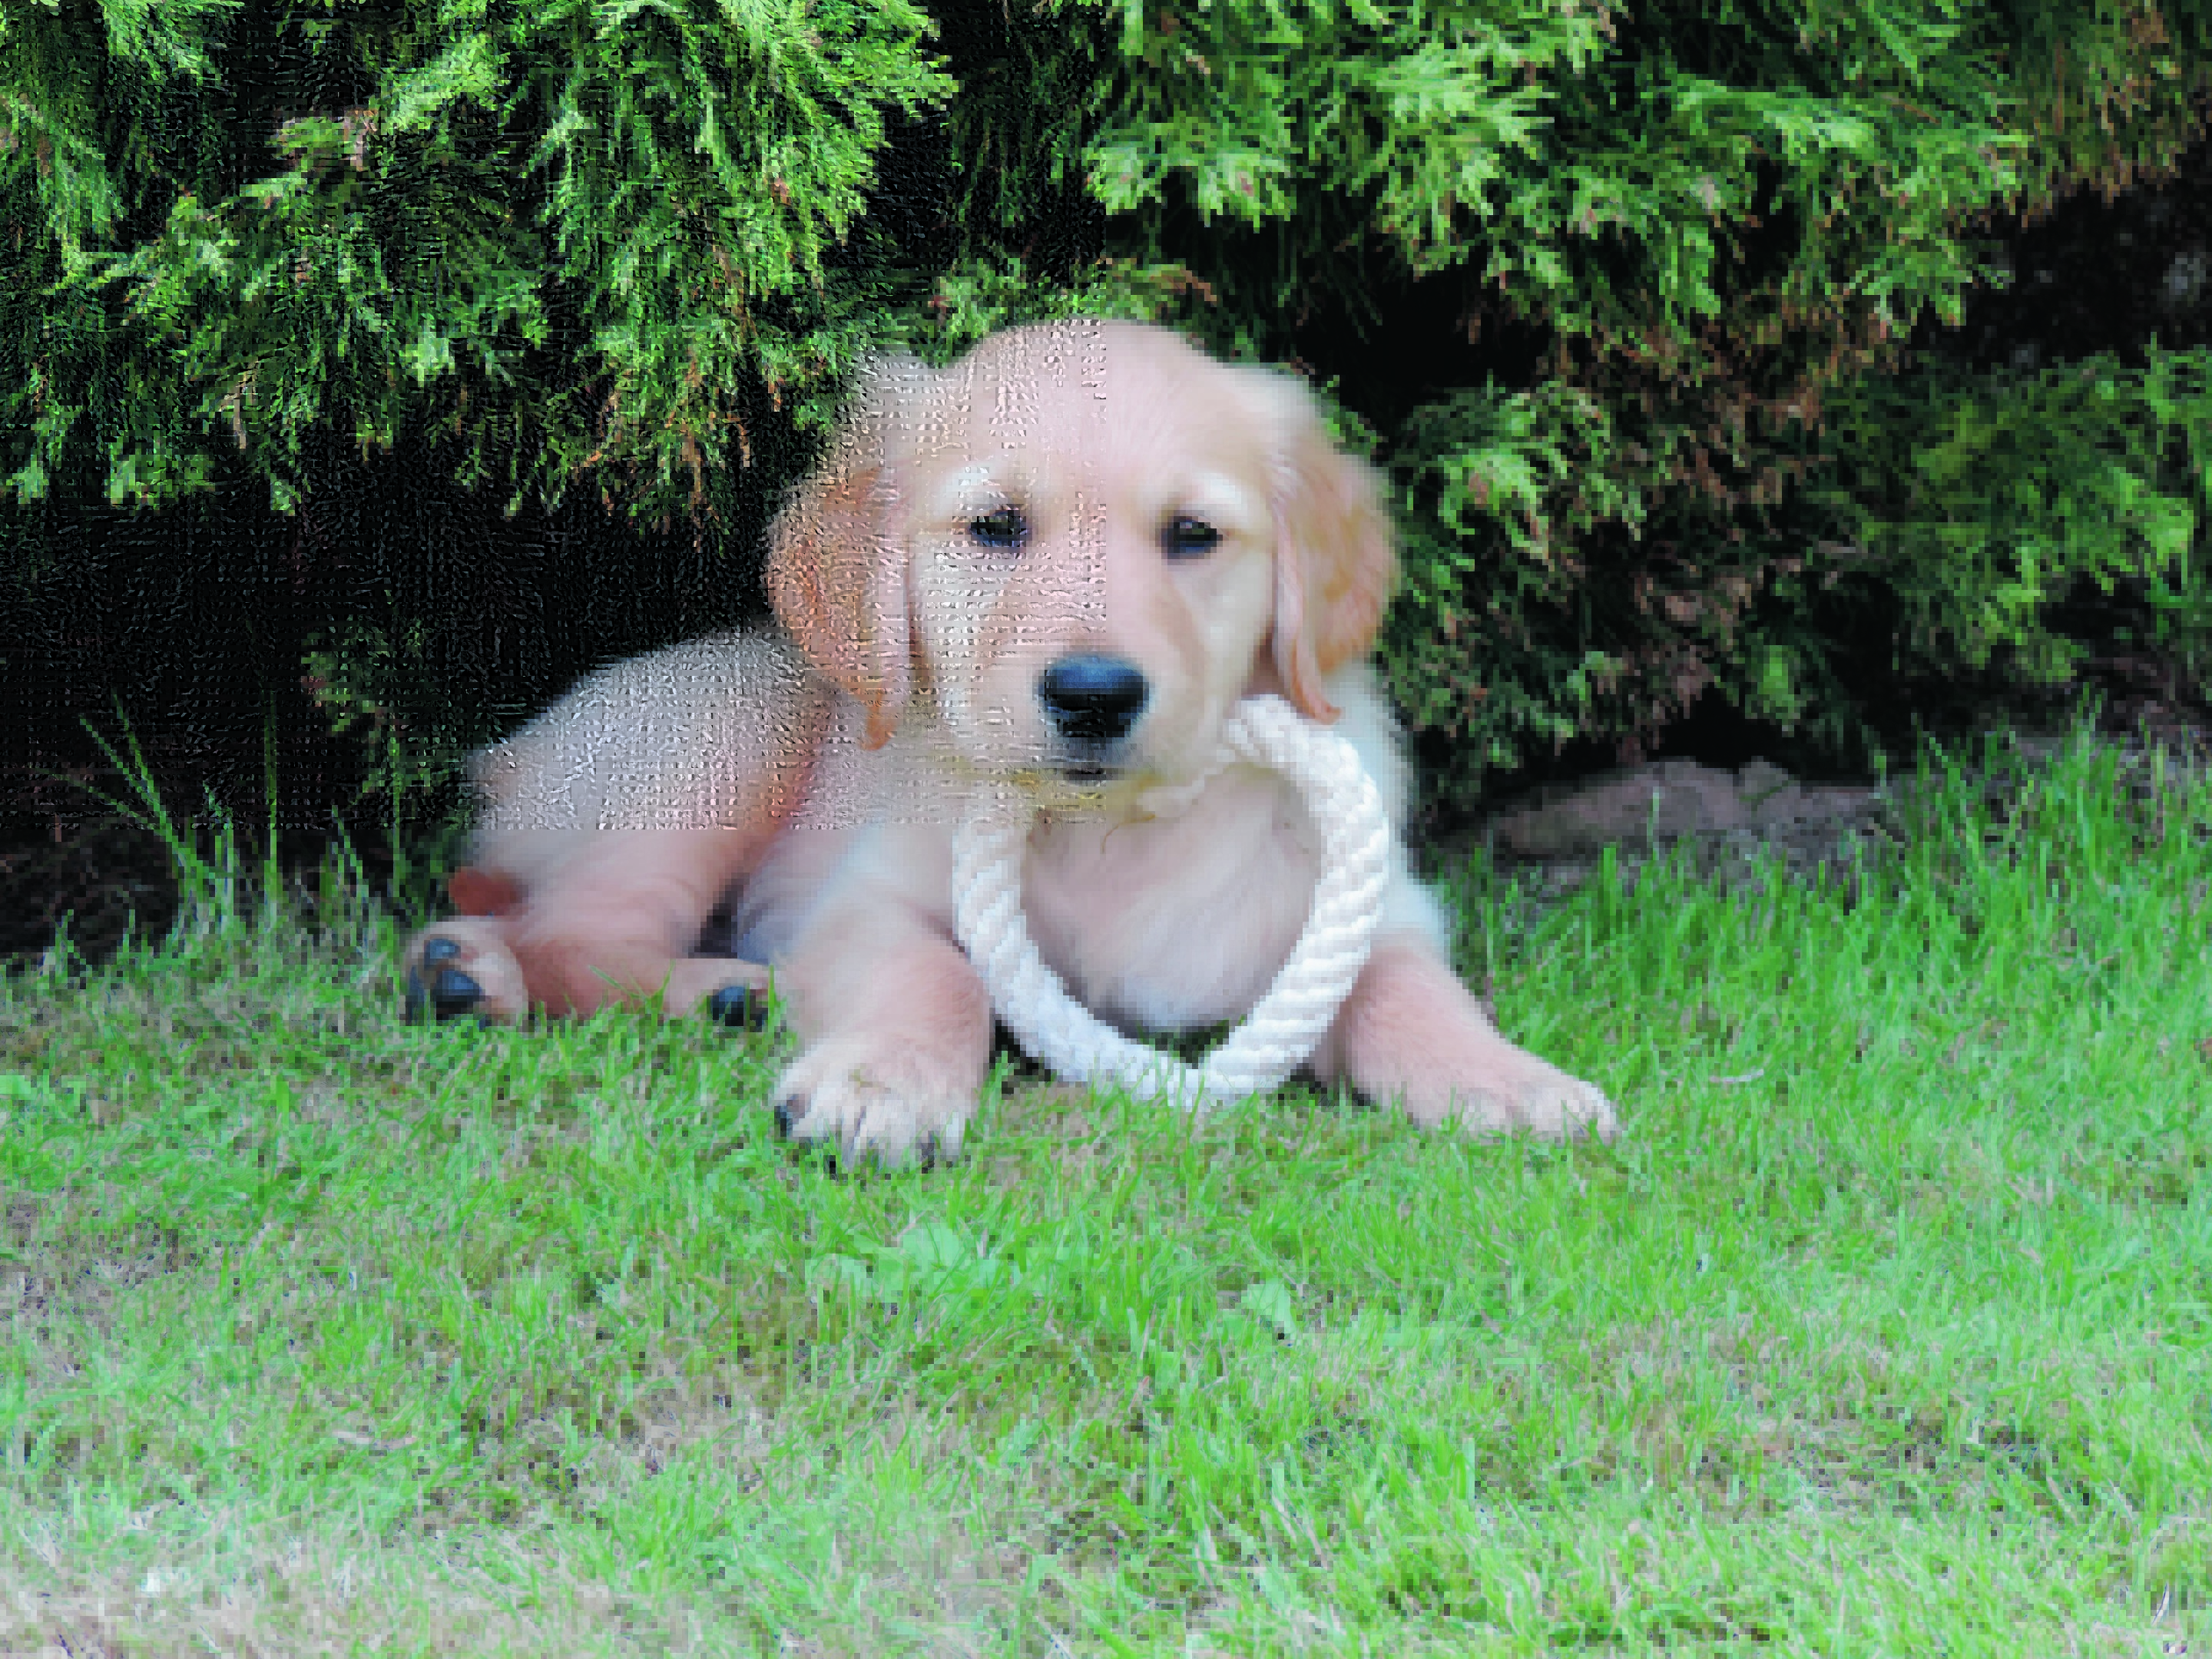 This is seven week old golden retriever Denver, who stays with Emma Murphy and Kevin Reid at Lower Blackburn, Dunlugas, Turriff. Denver is our winner this week.